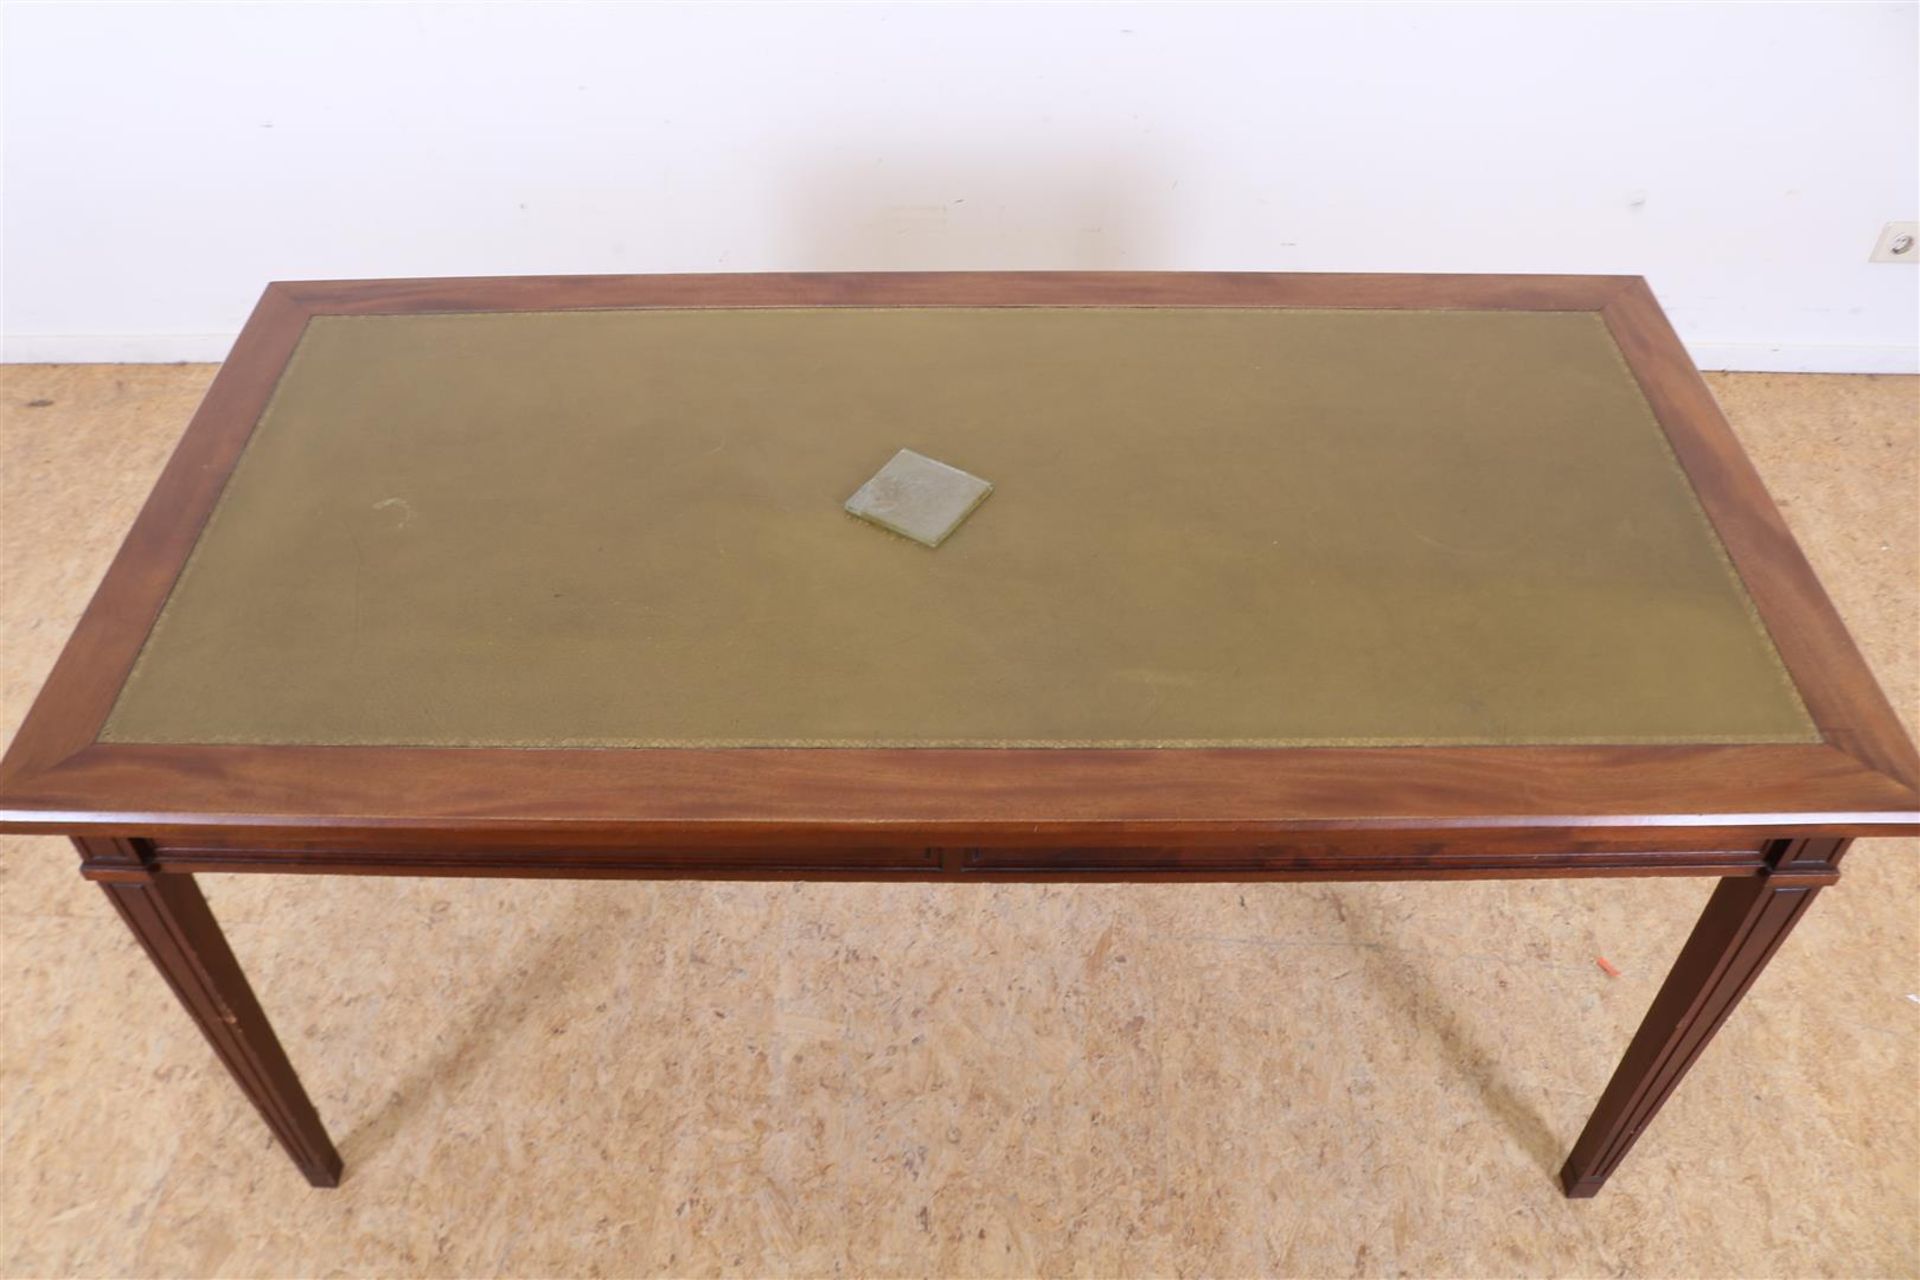 Mahogany desk with green inlaid top on tapered legs, h. 77, w. 160, d. 80 cm. (glass plate glued - Image 2 of 4